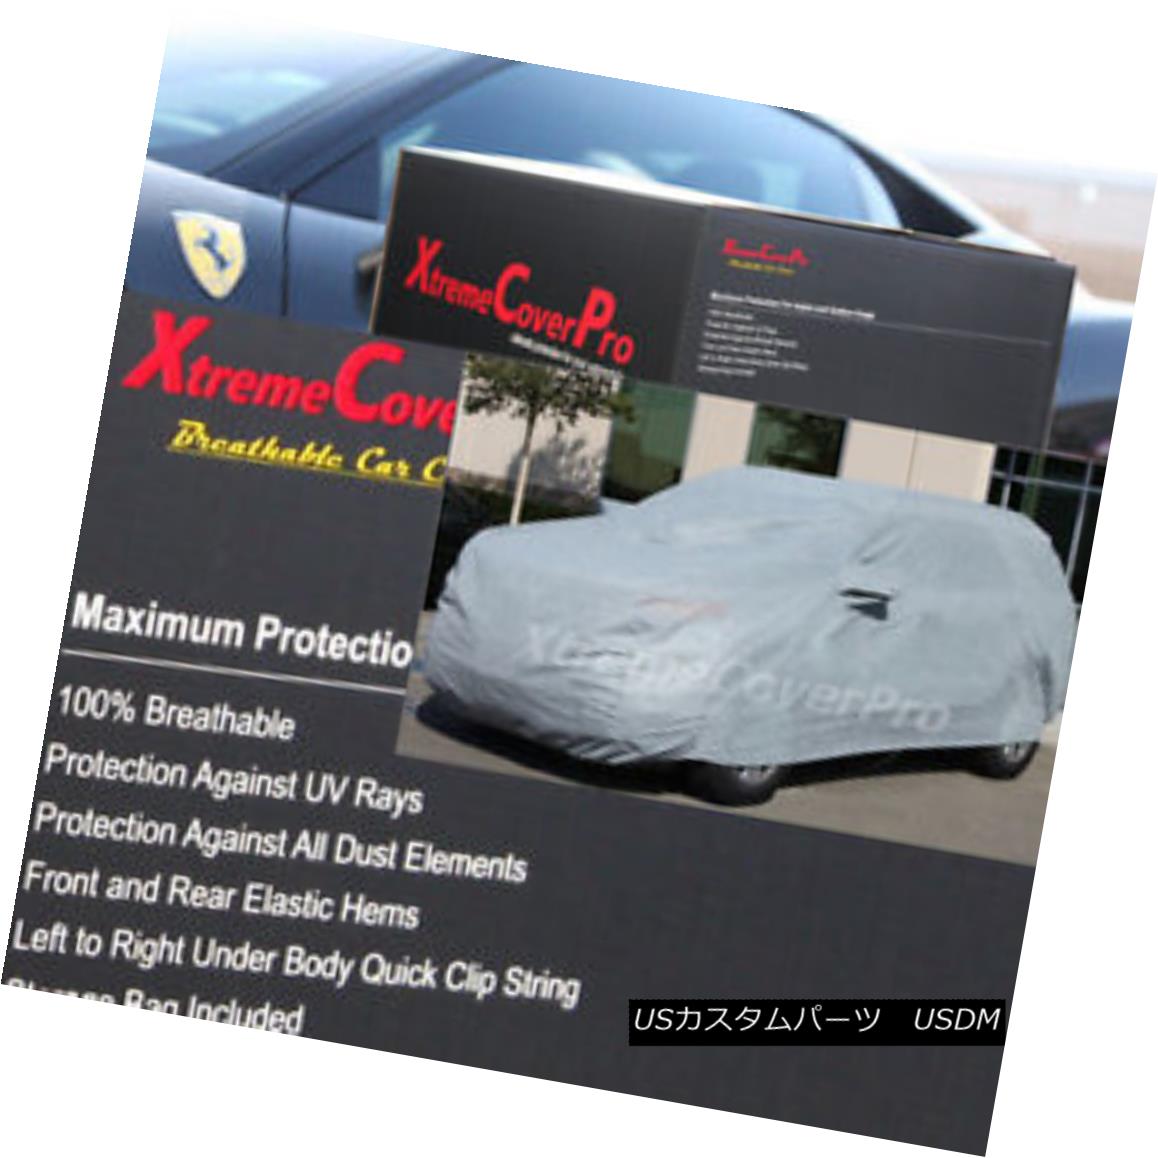 2015 JEEP CHEROKEE Breathable Car Cover w Mirror Pockets - Gray カーカバー 2015 JEEP CHEROKEE Breathable Car Cover w Mirror Pockets - Gray 2015 JEEP CHEROKEE通気性のある車カバー付き ミラーポケット - グレー